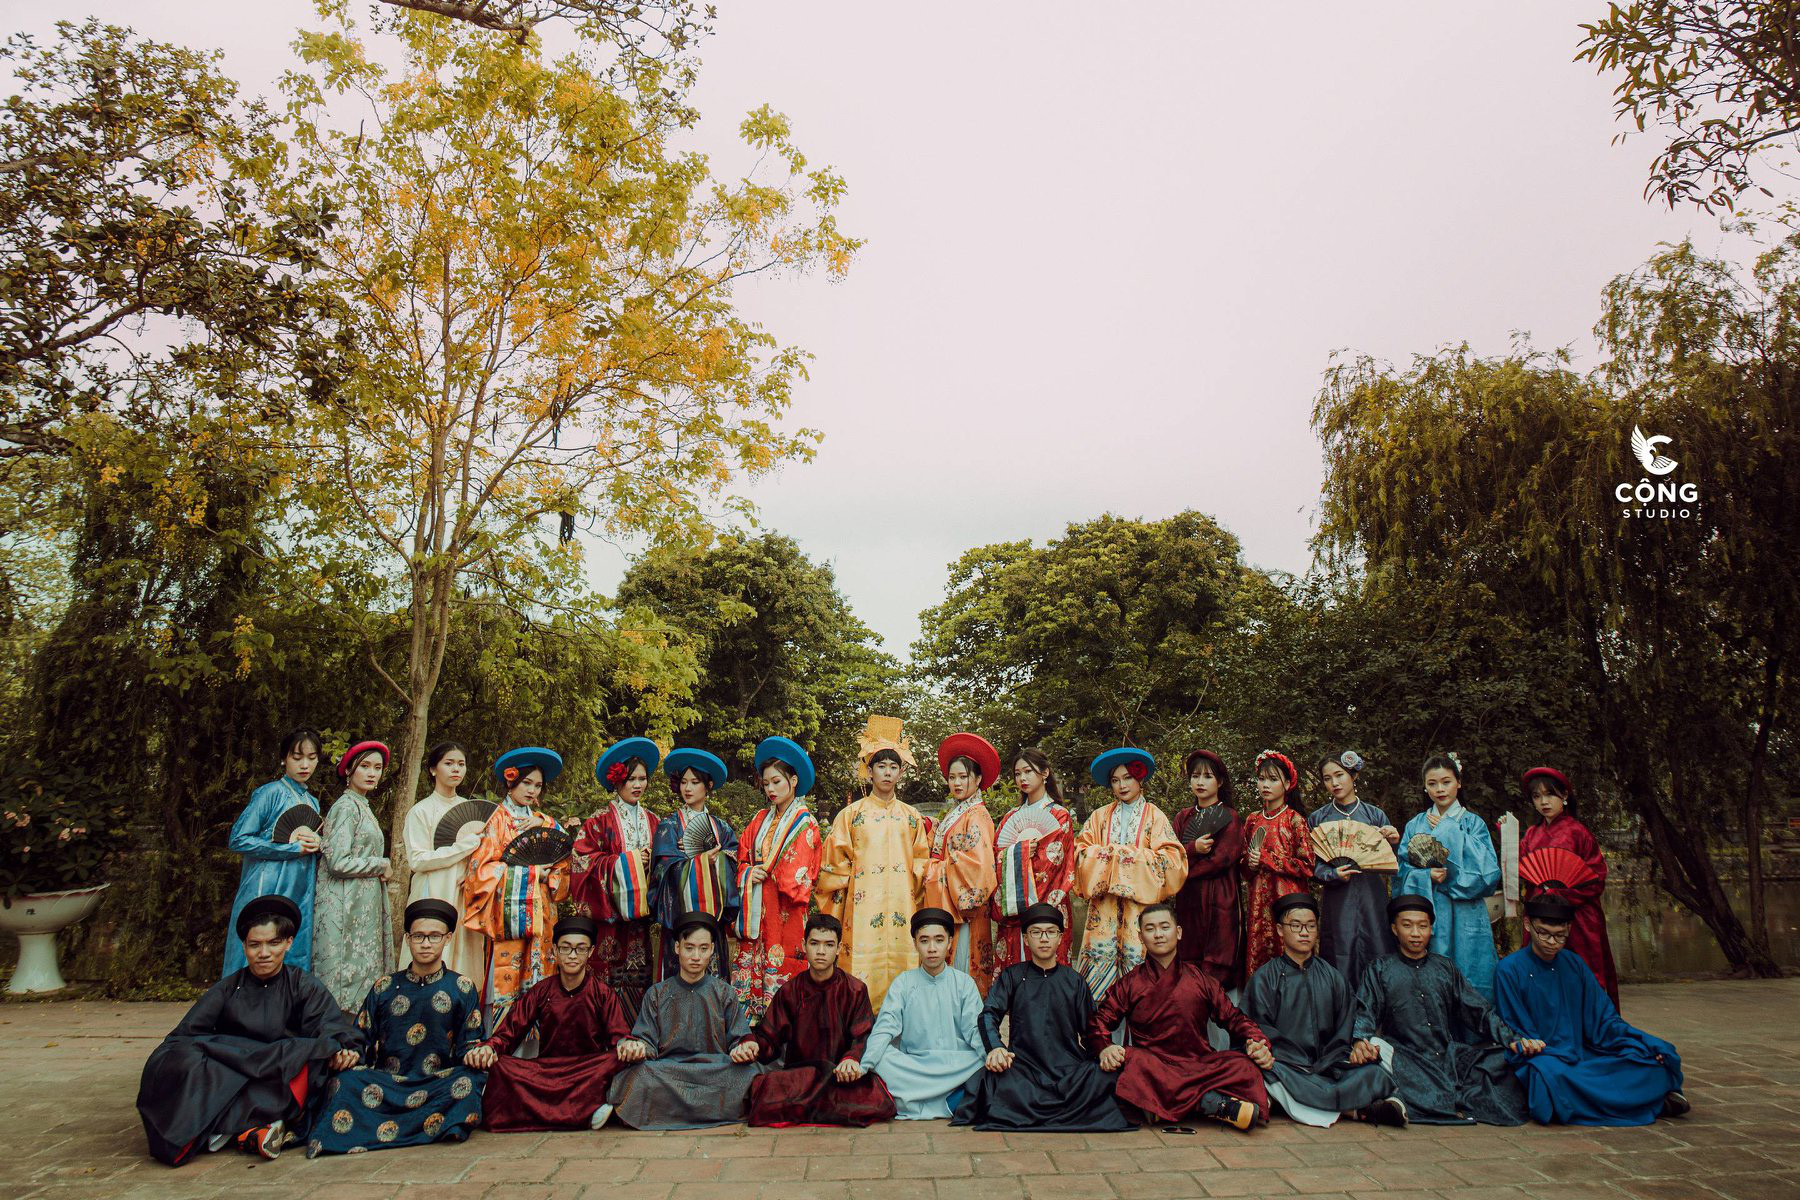 12th-grade French majors at the Le Hong Phong High School for the Gifted in Nam Dinh Province, Vietnam pose for a ‘royal family photo’ at the Tran Temple wearing ancient costumes in this supplied yearbook photo.